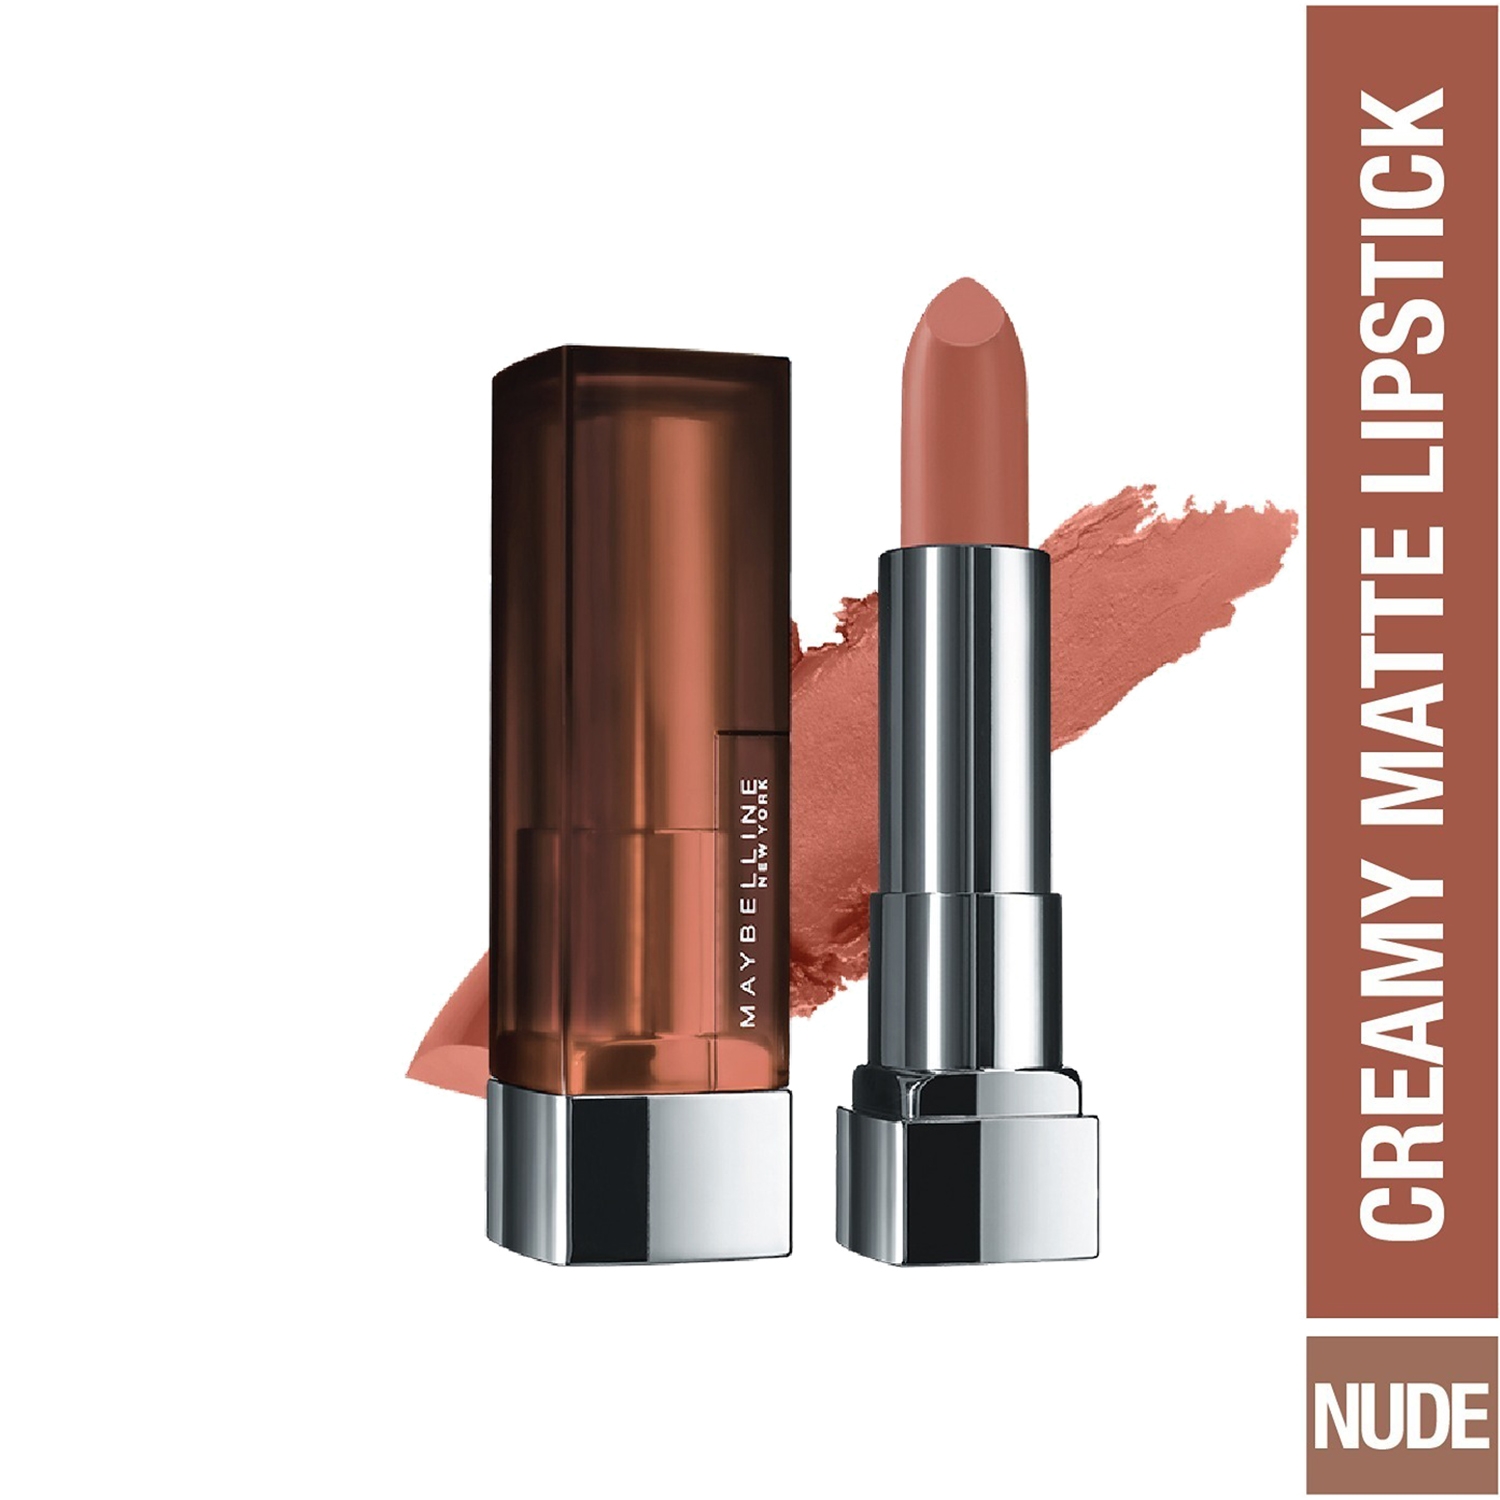 Maybelline New York | Maybelline New York Color Sensational Inti-Matte Nude Lipstick - 506 Toasted Brown (3.9g)